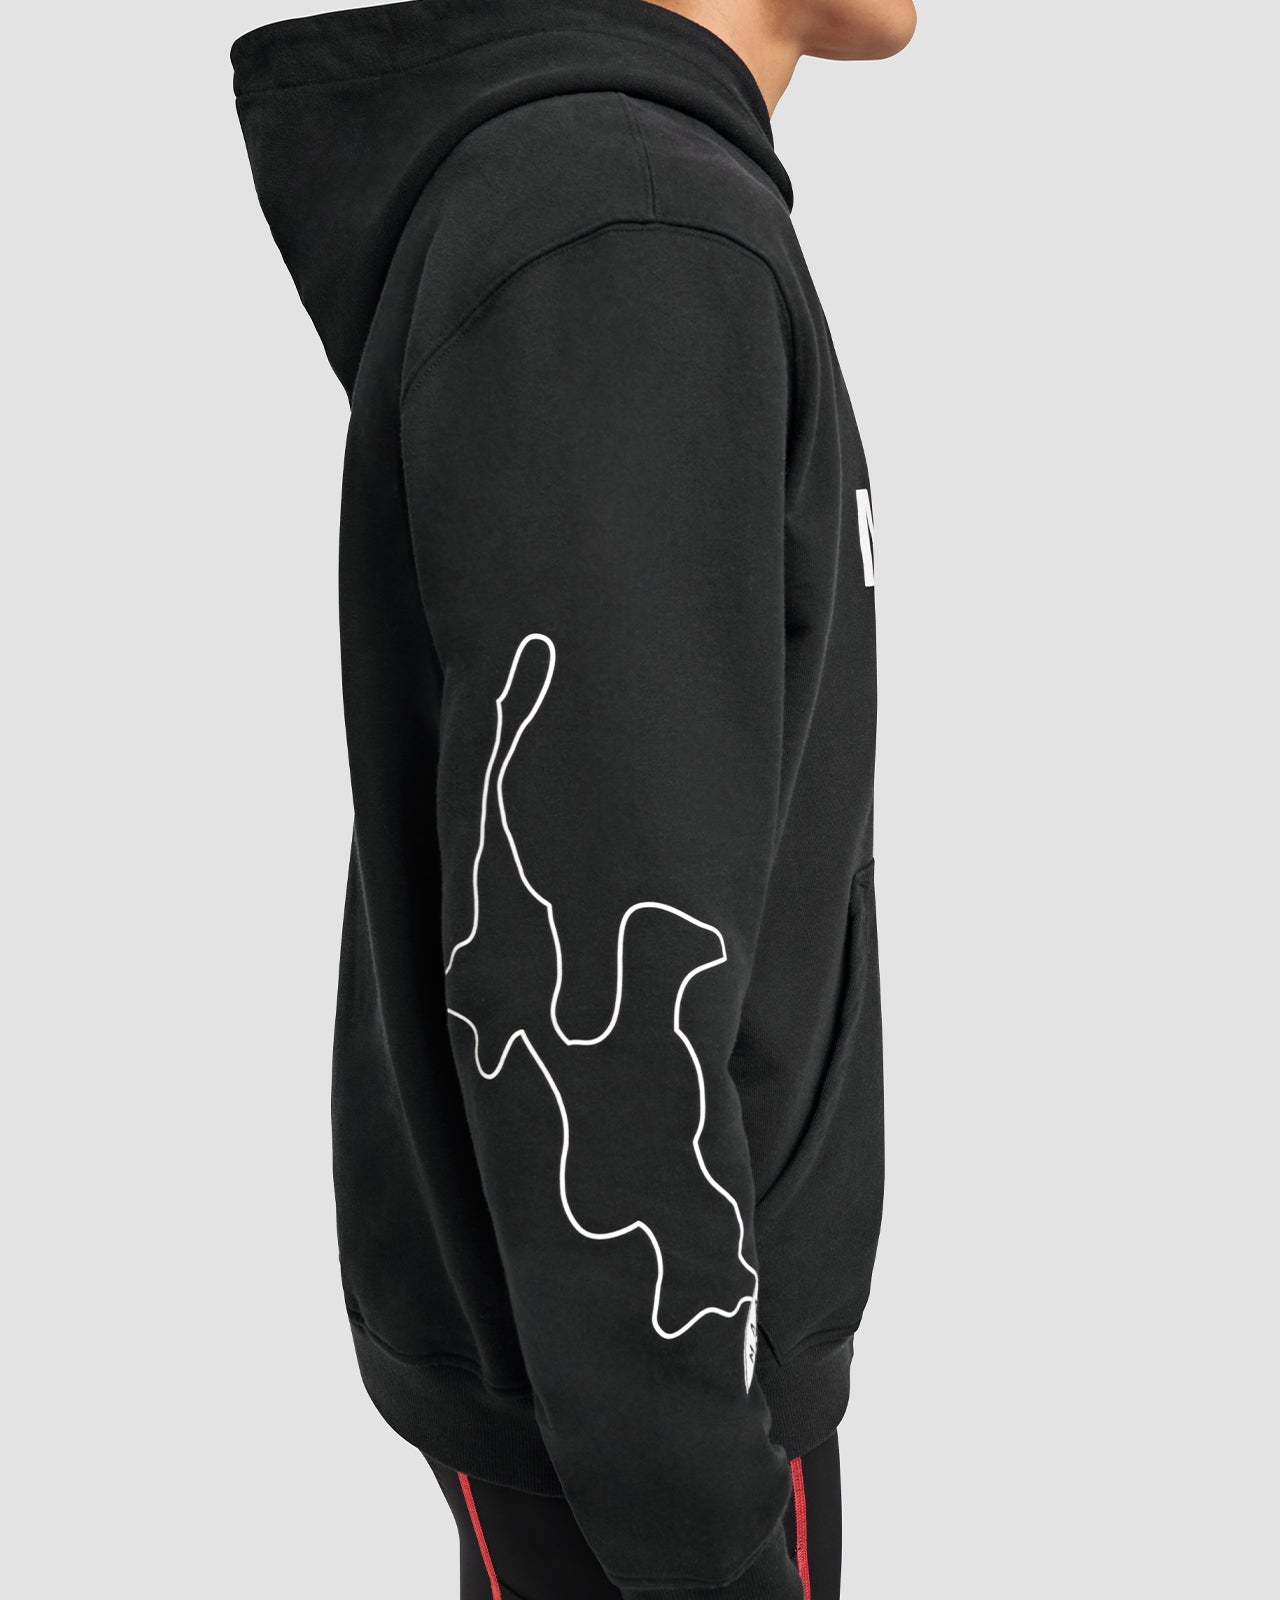 Off white hoodie “abstract arrows” 2020 - パーカー